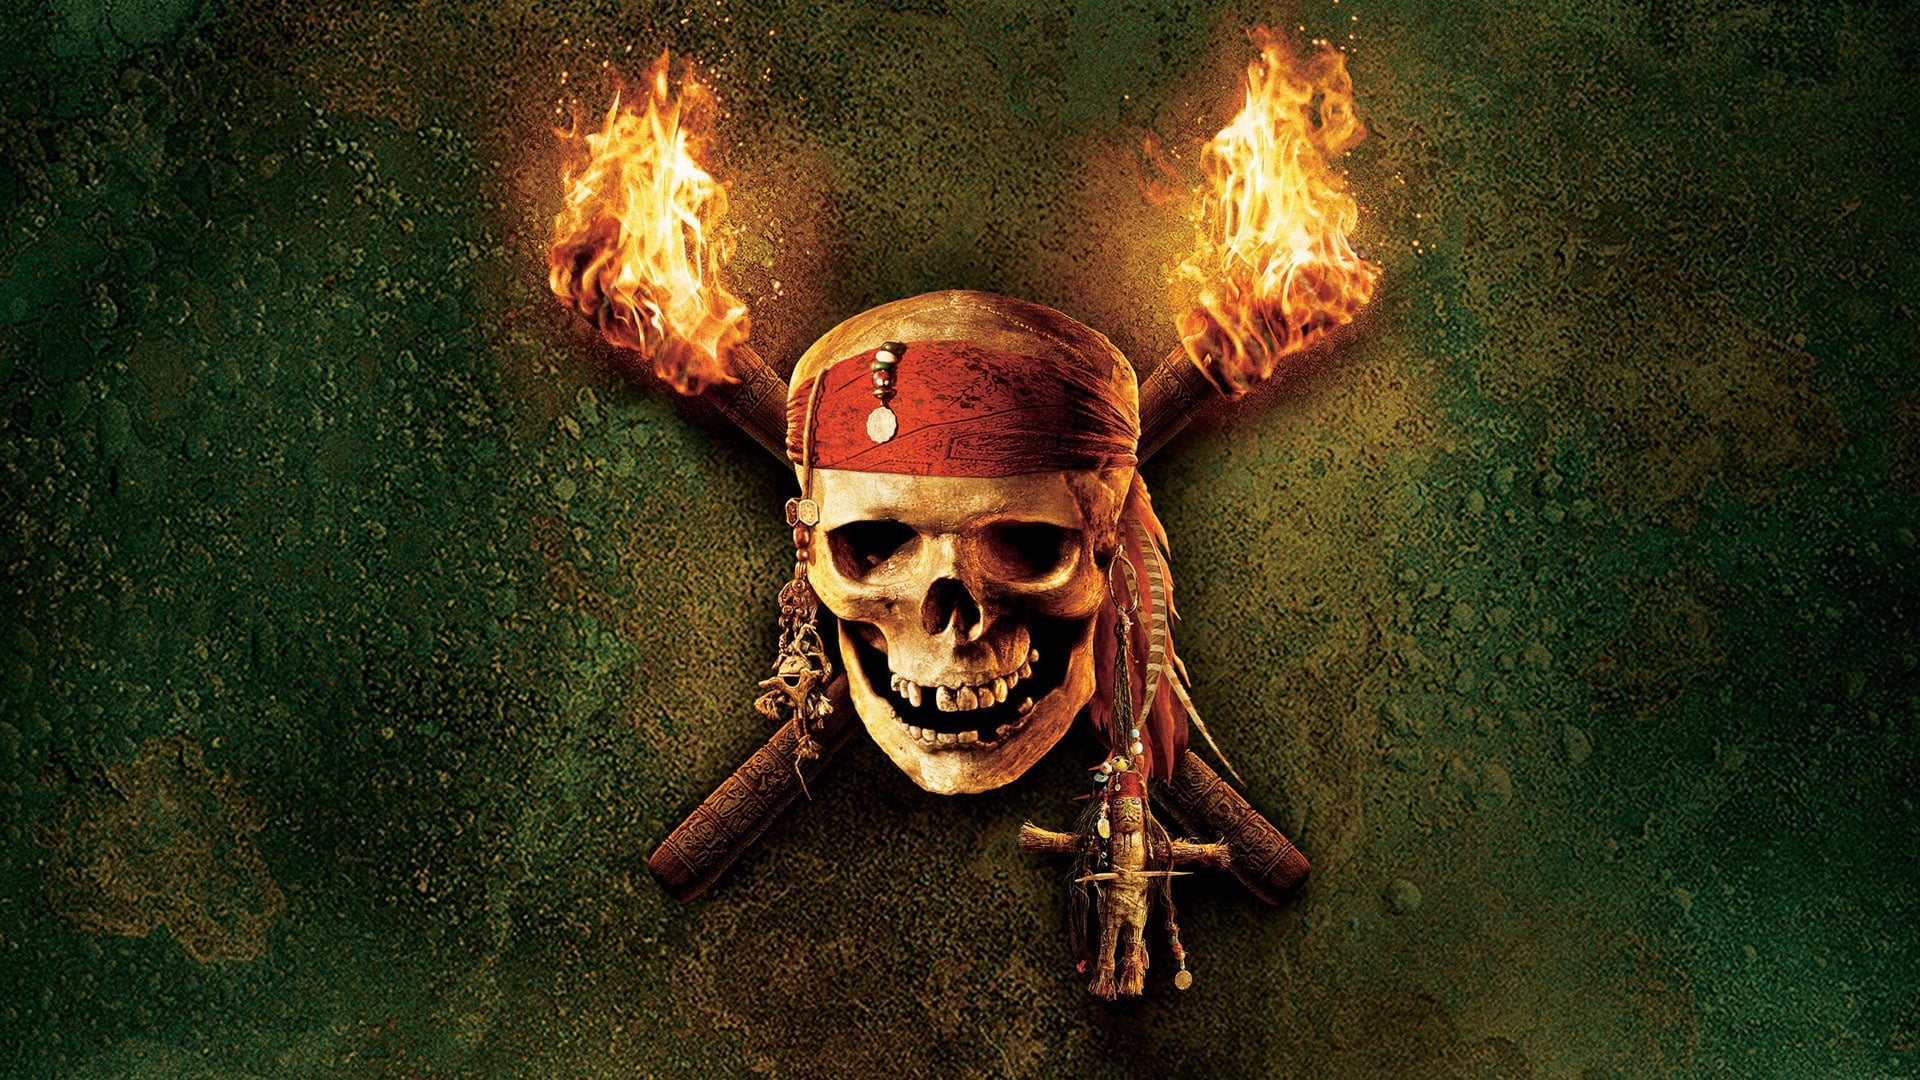 Pirates of the caribbean 2 full movie online